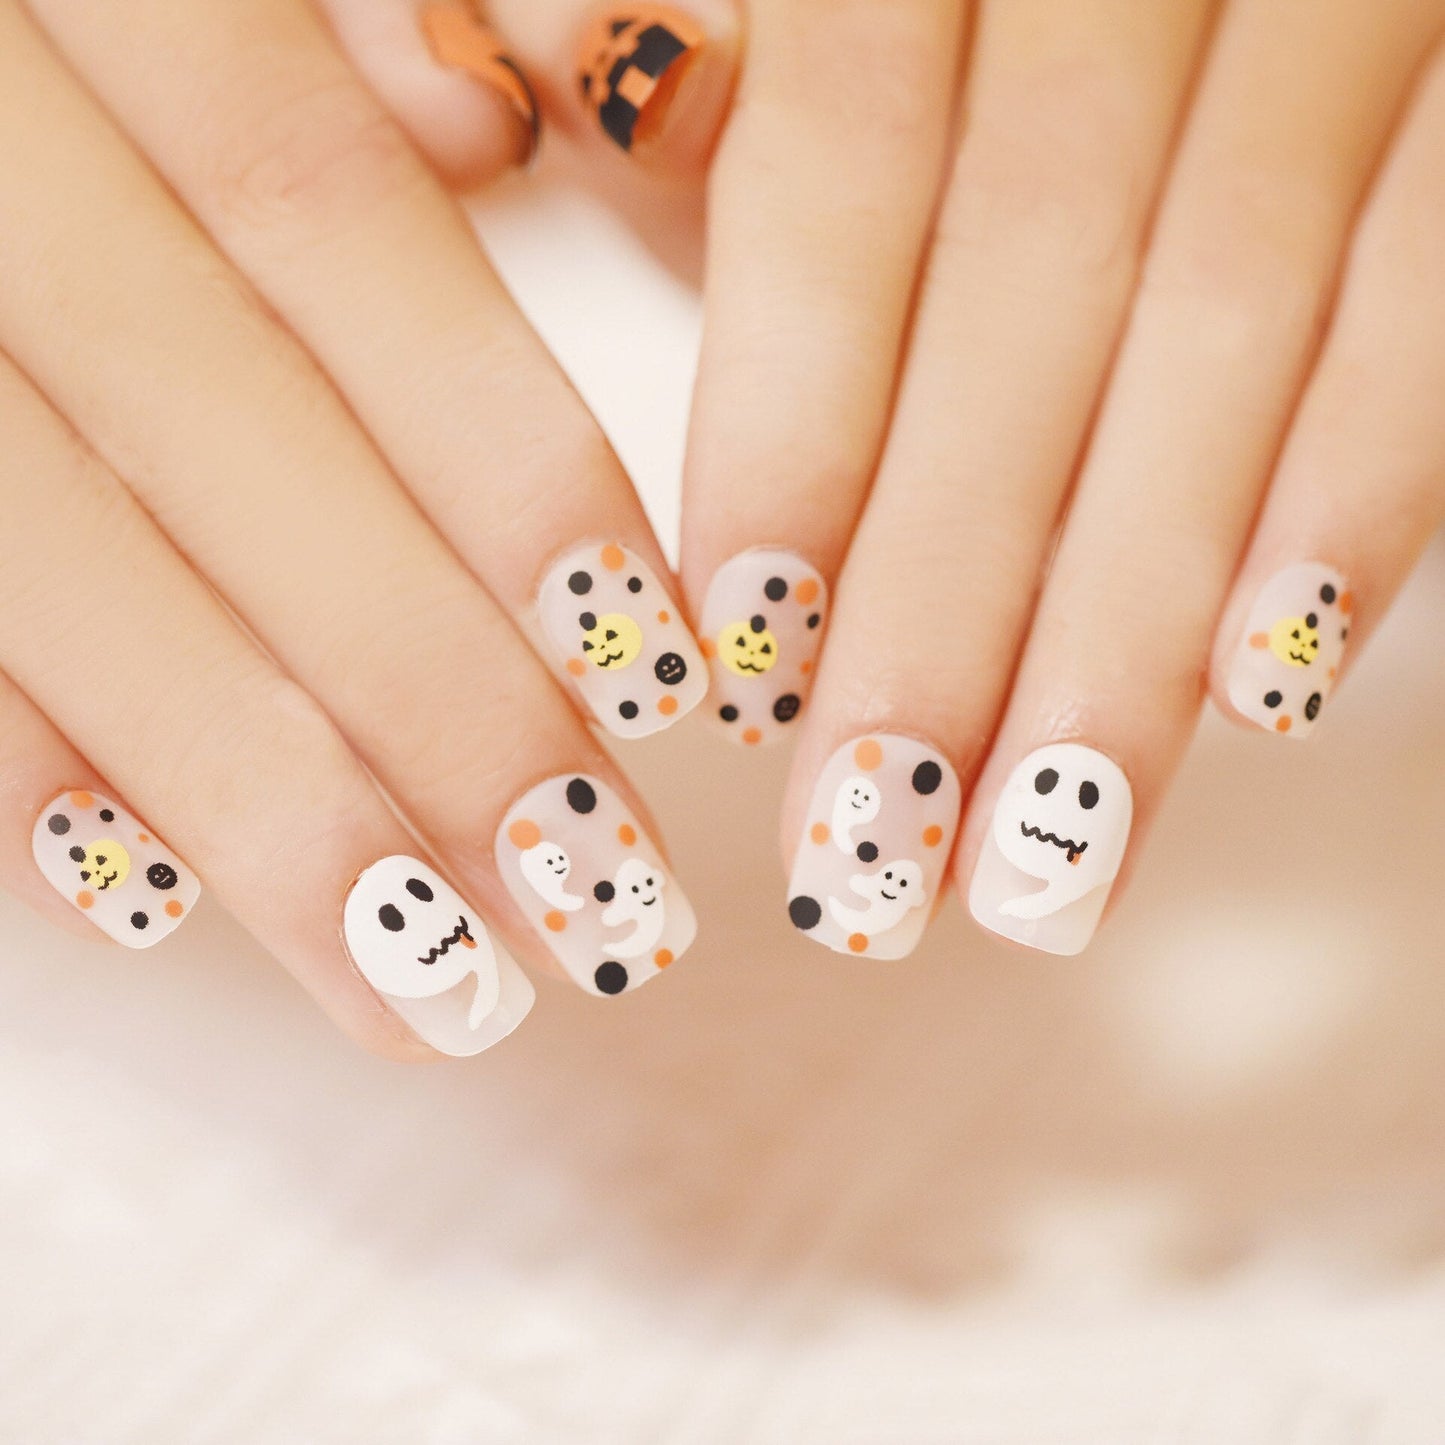 24P Halloween White Ghost Spooky Pumpkin Wearing False Nails Full Coverage Coffin Press on Nails Long Ballet Artifical Fake Nail